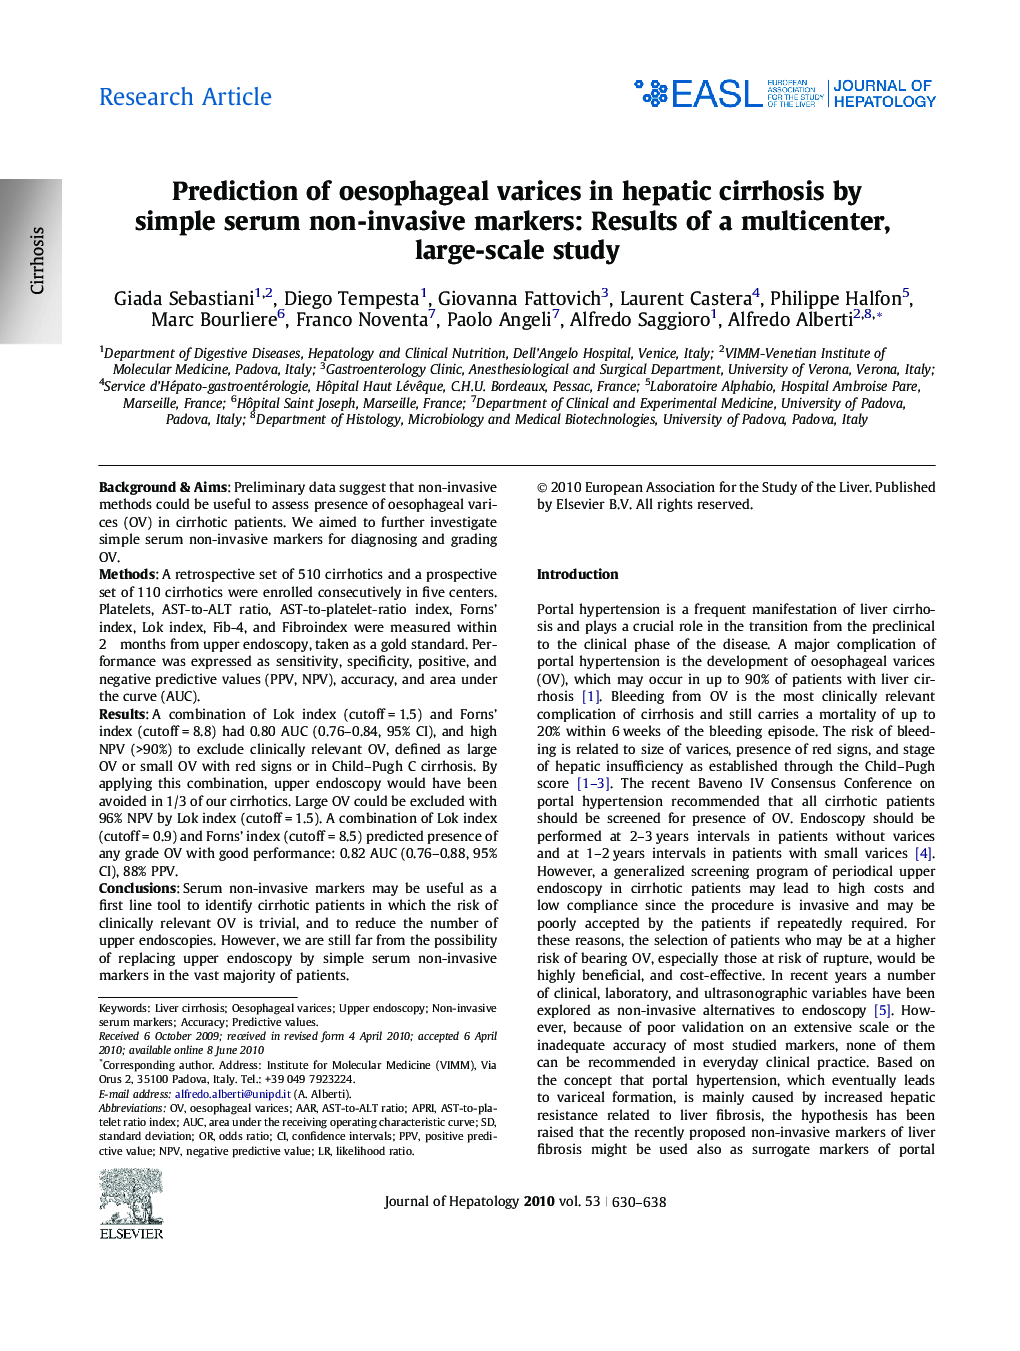 Research ArticlePrediction of oesophageal varices in hepatic cirrhosis by simple serum non-invasive markers: Results of a multicenter, large-scale study